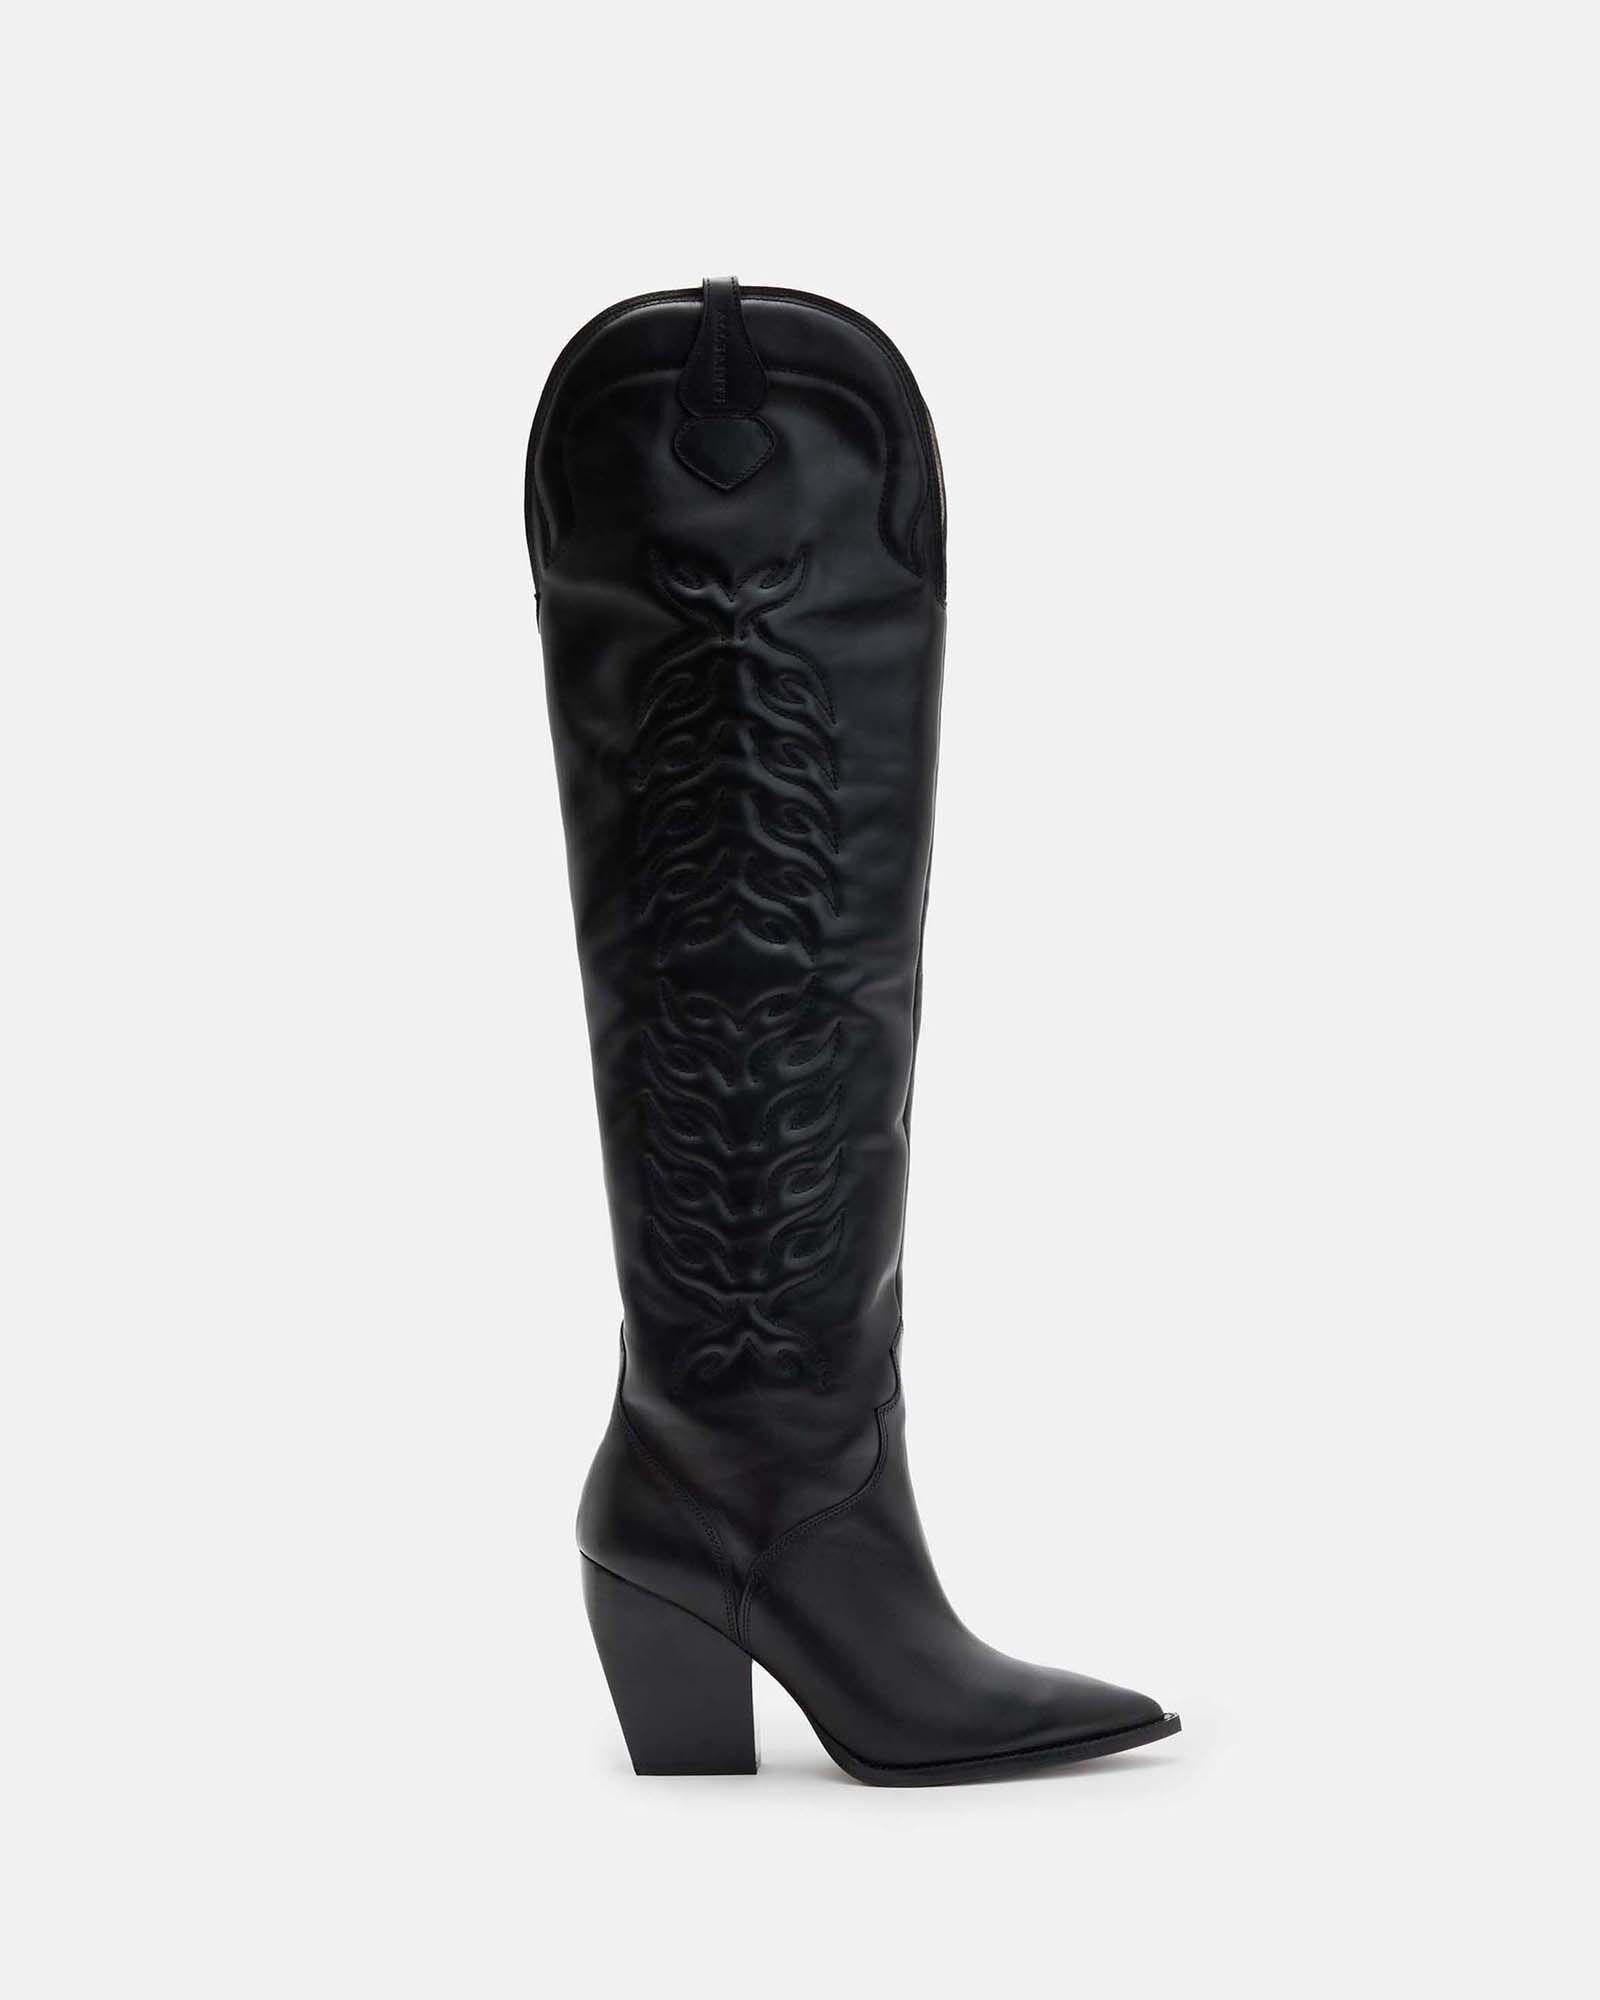 Leather Boots & Ankle Boots for Women | ALLSAINTS US